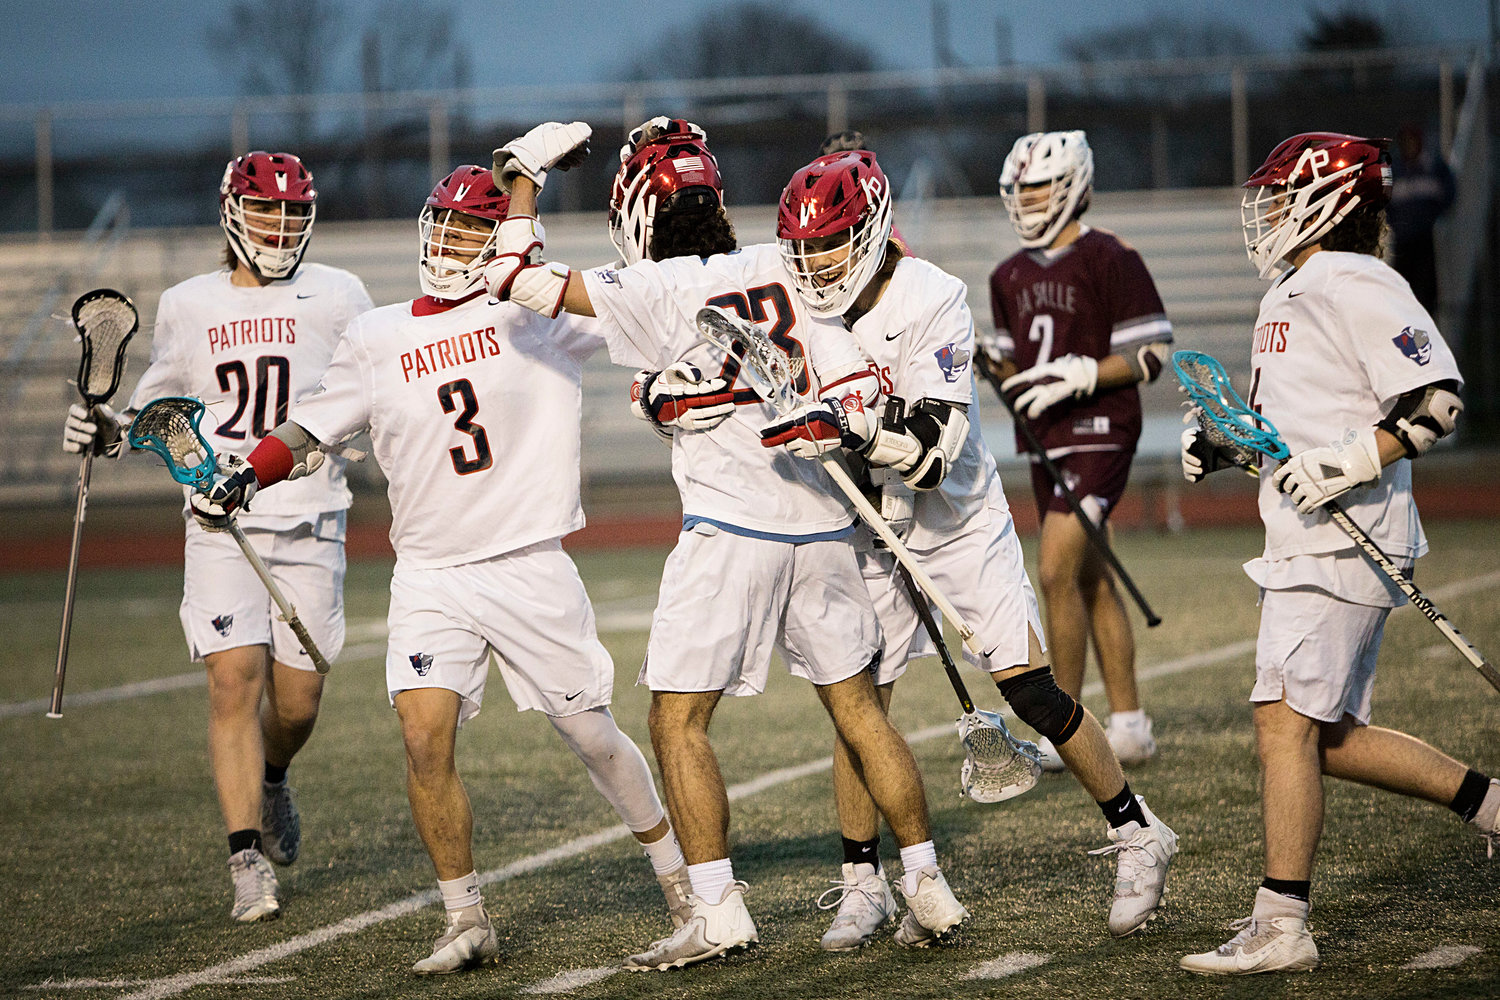 The Patriots celebrate tying the score up in the first quarter against La Salle.